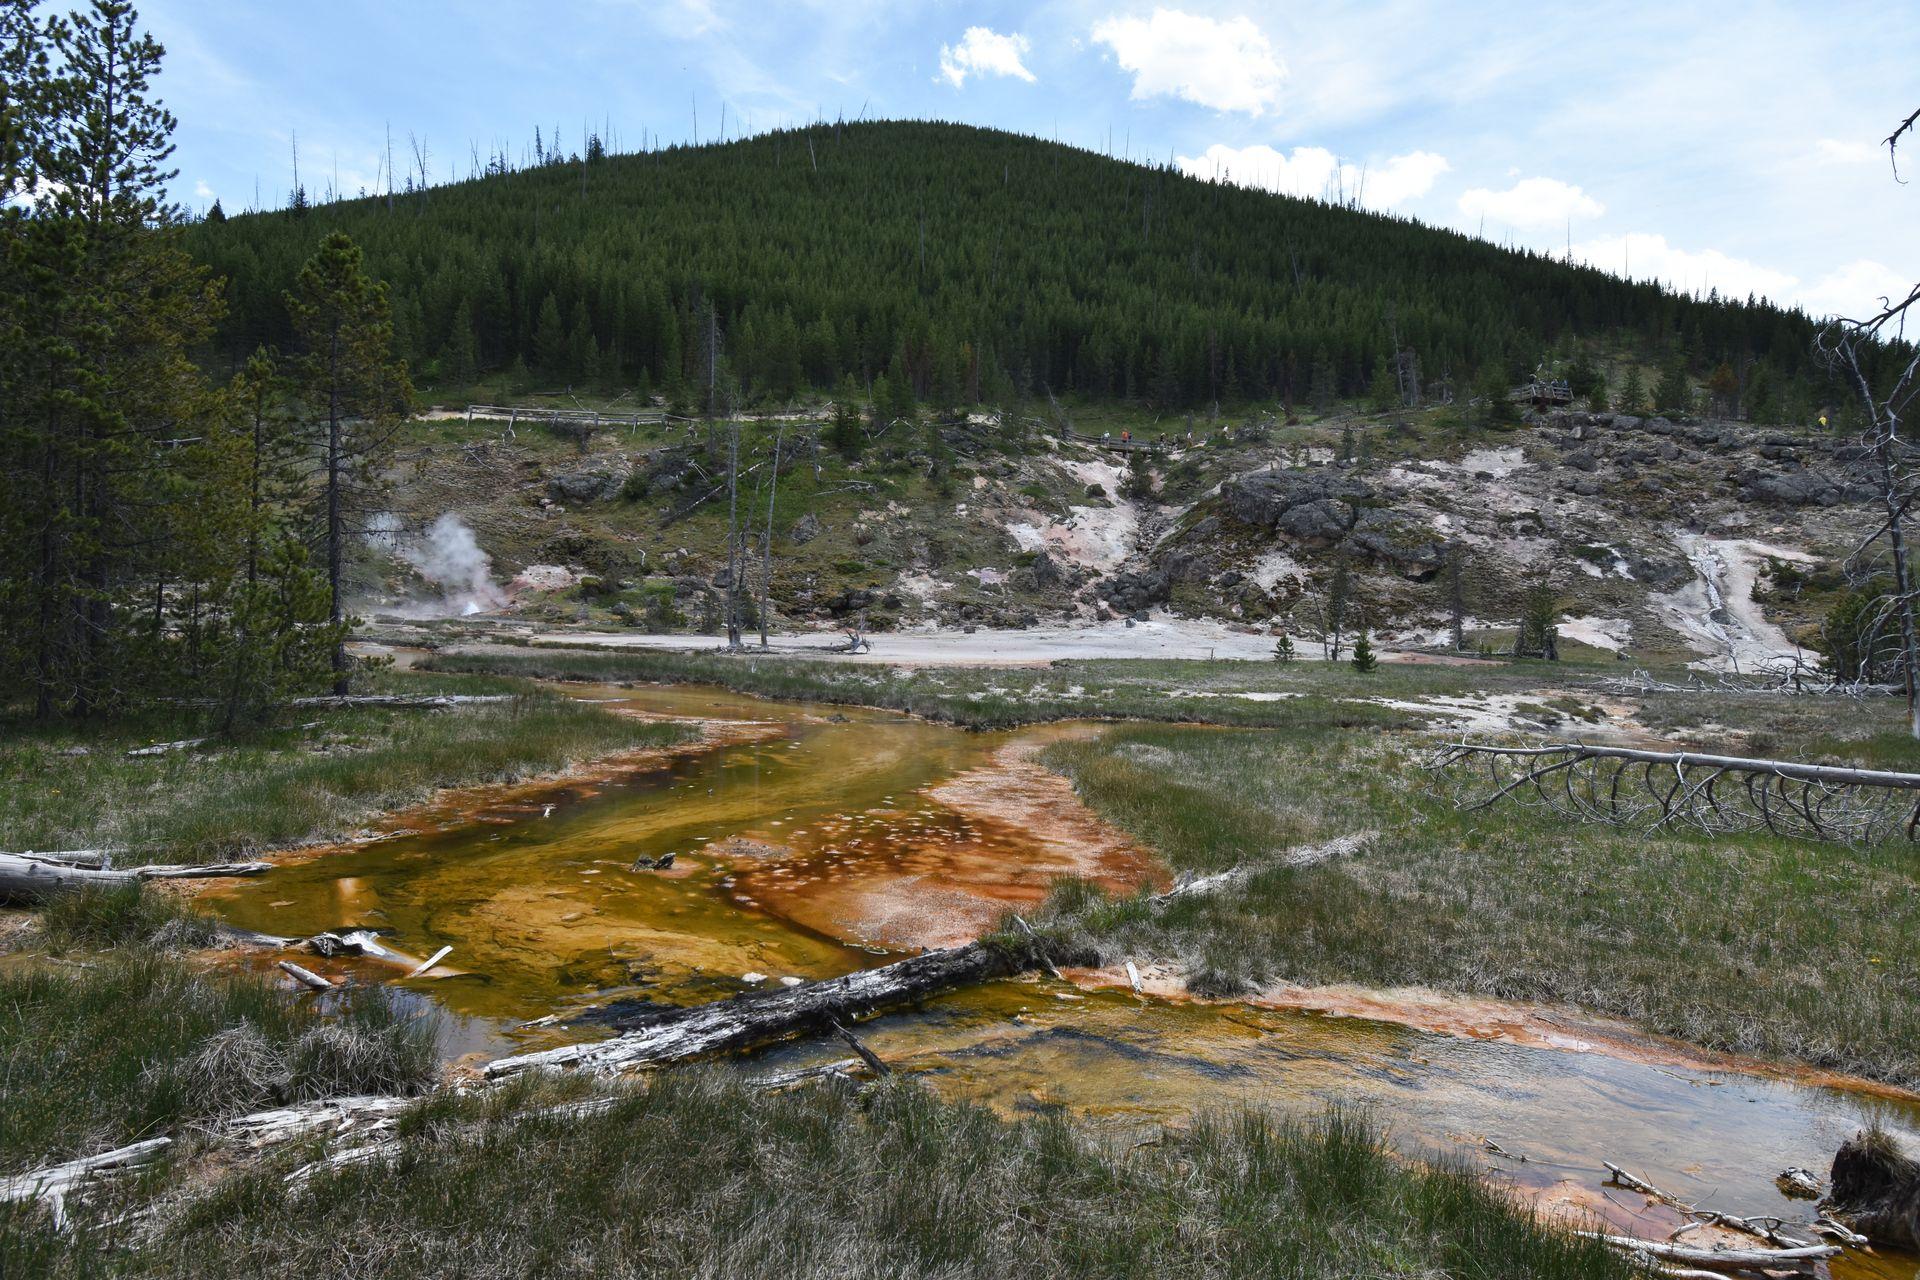 Orange and yellow hot springs with a green hill in the background at the Artist's Paintpots.